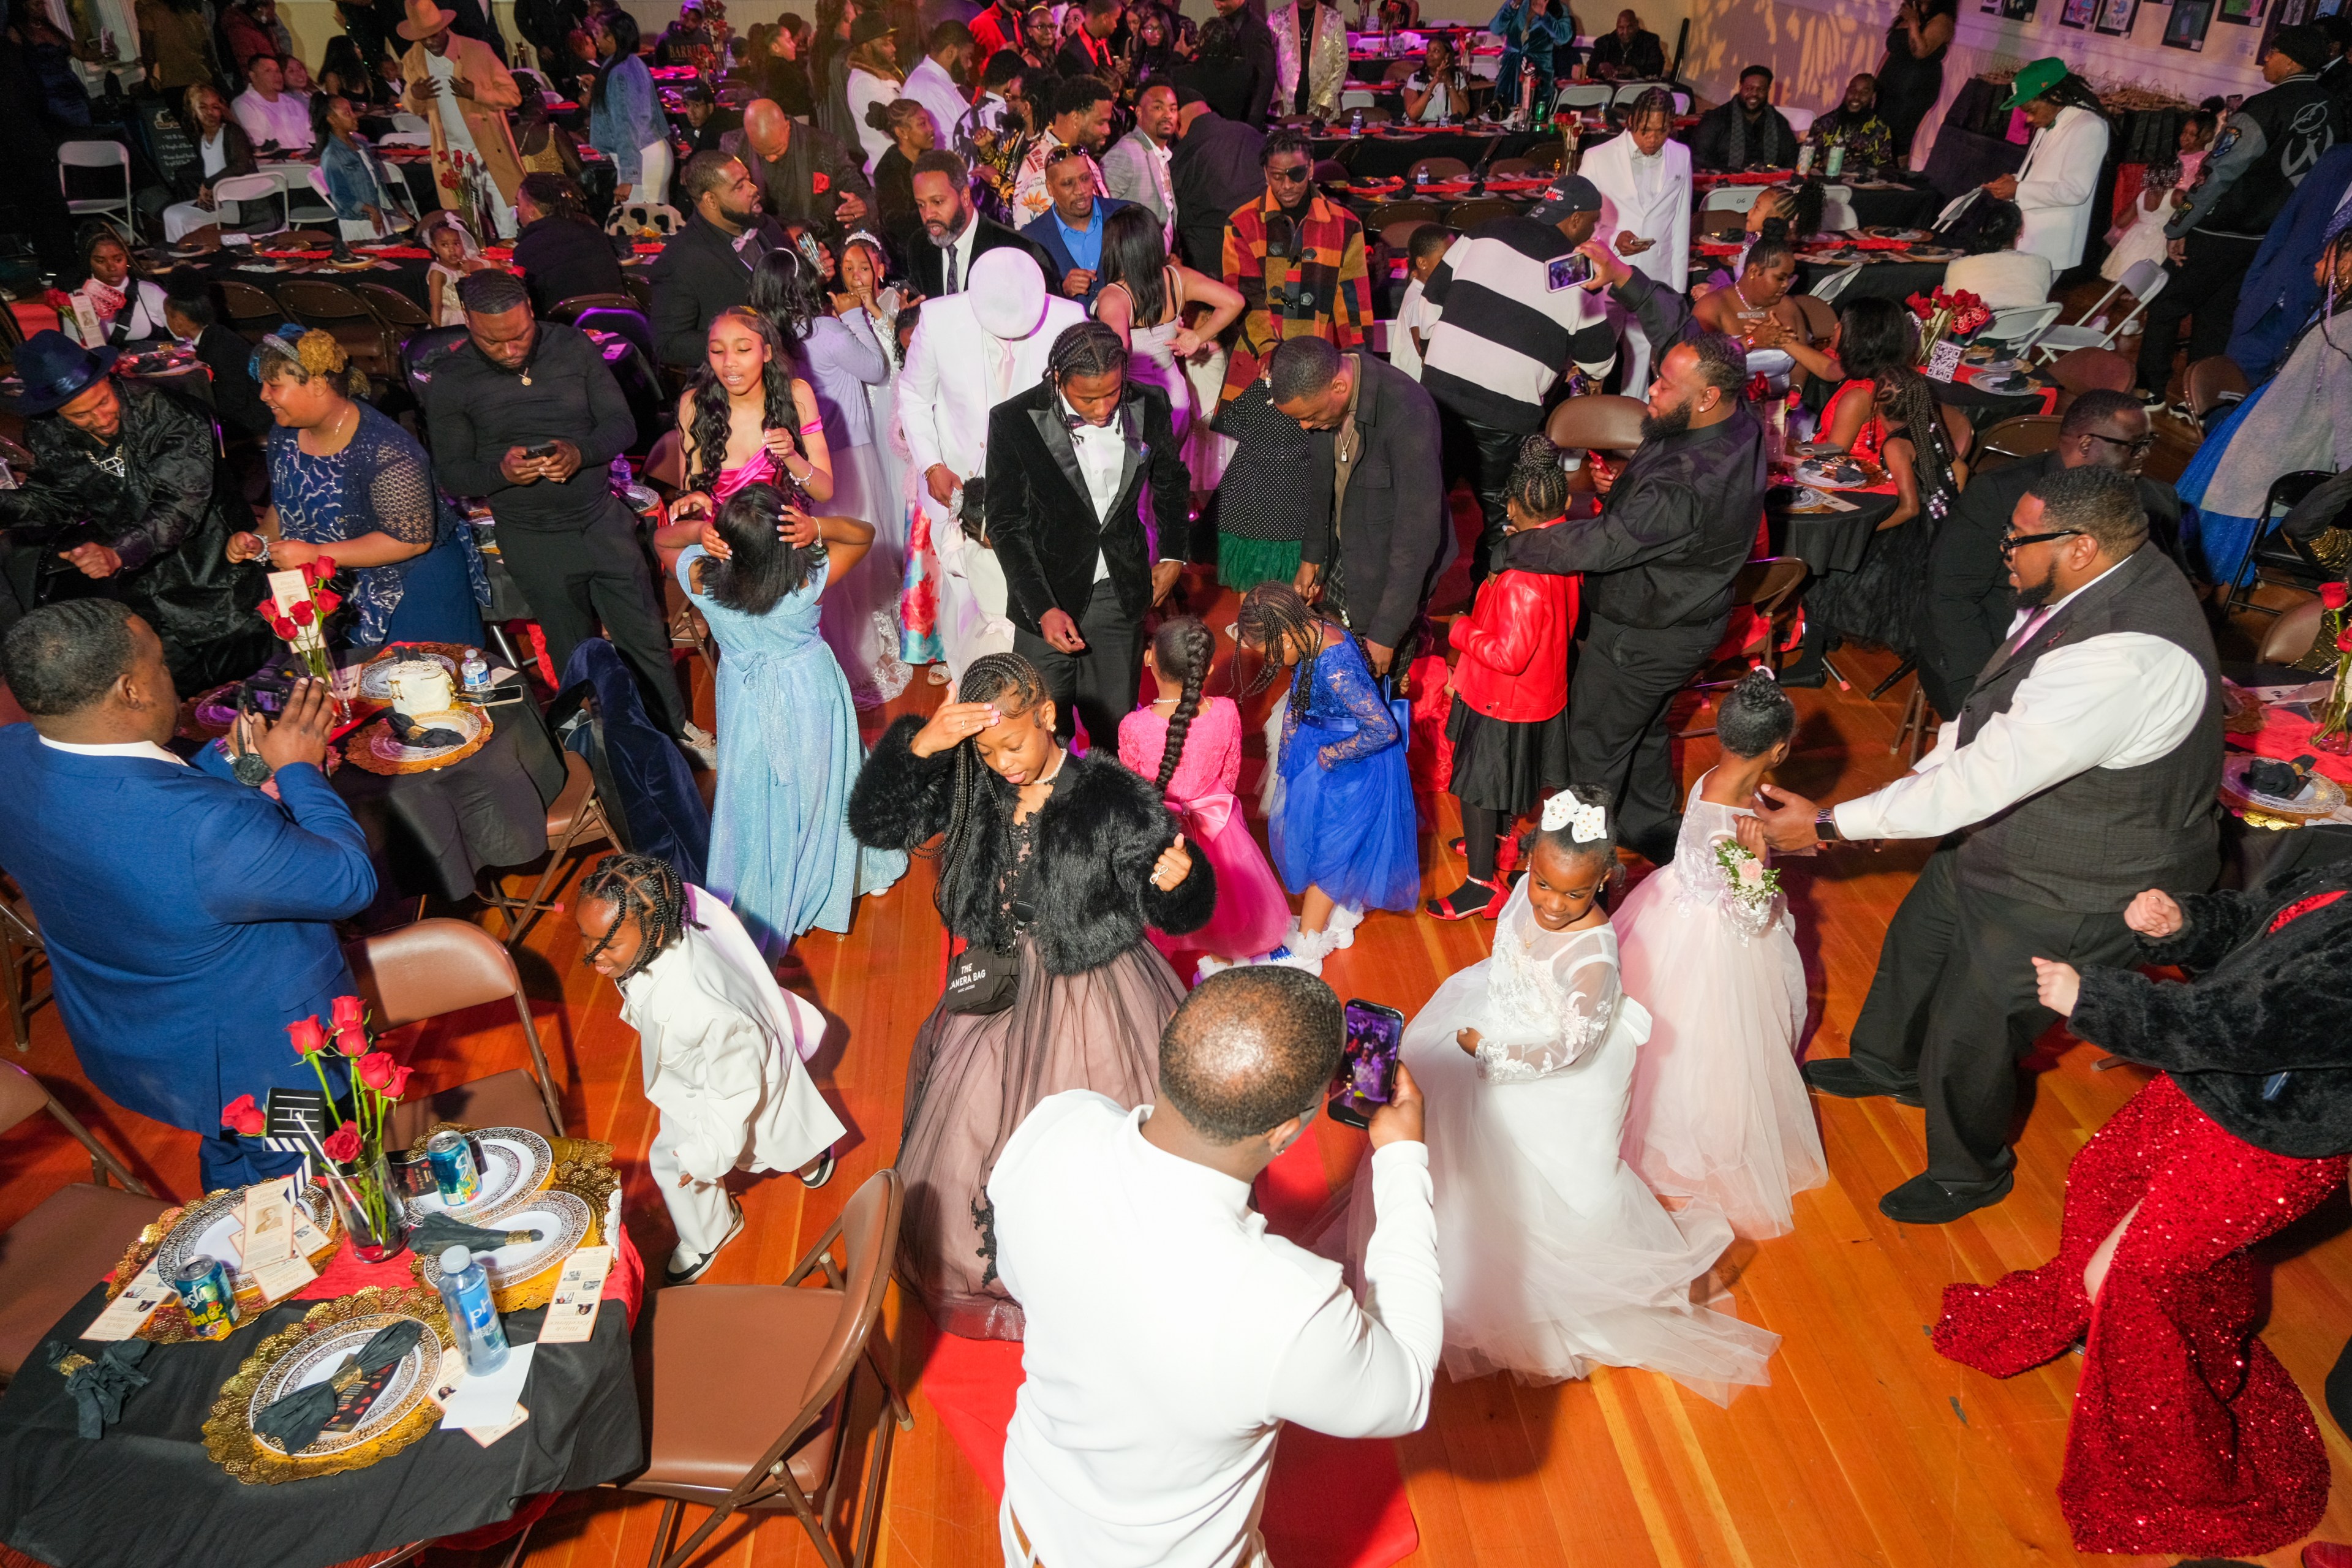 A lively indoor celebration with elegantly dressed adults and children mingling and dancing.